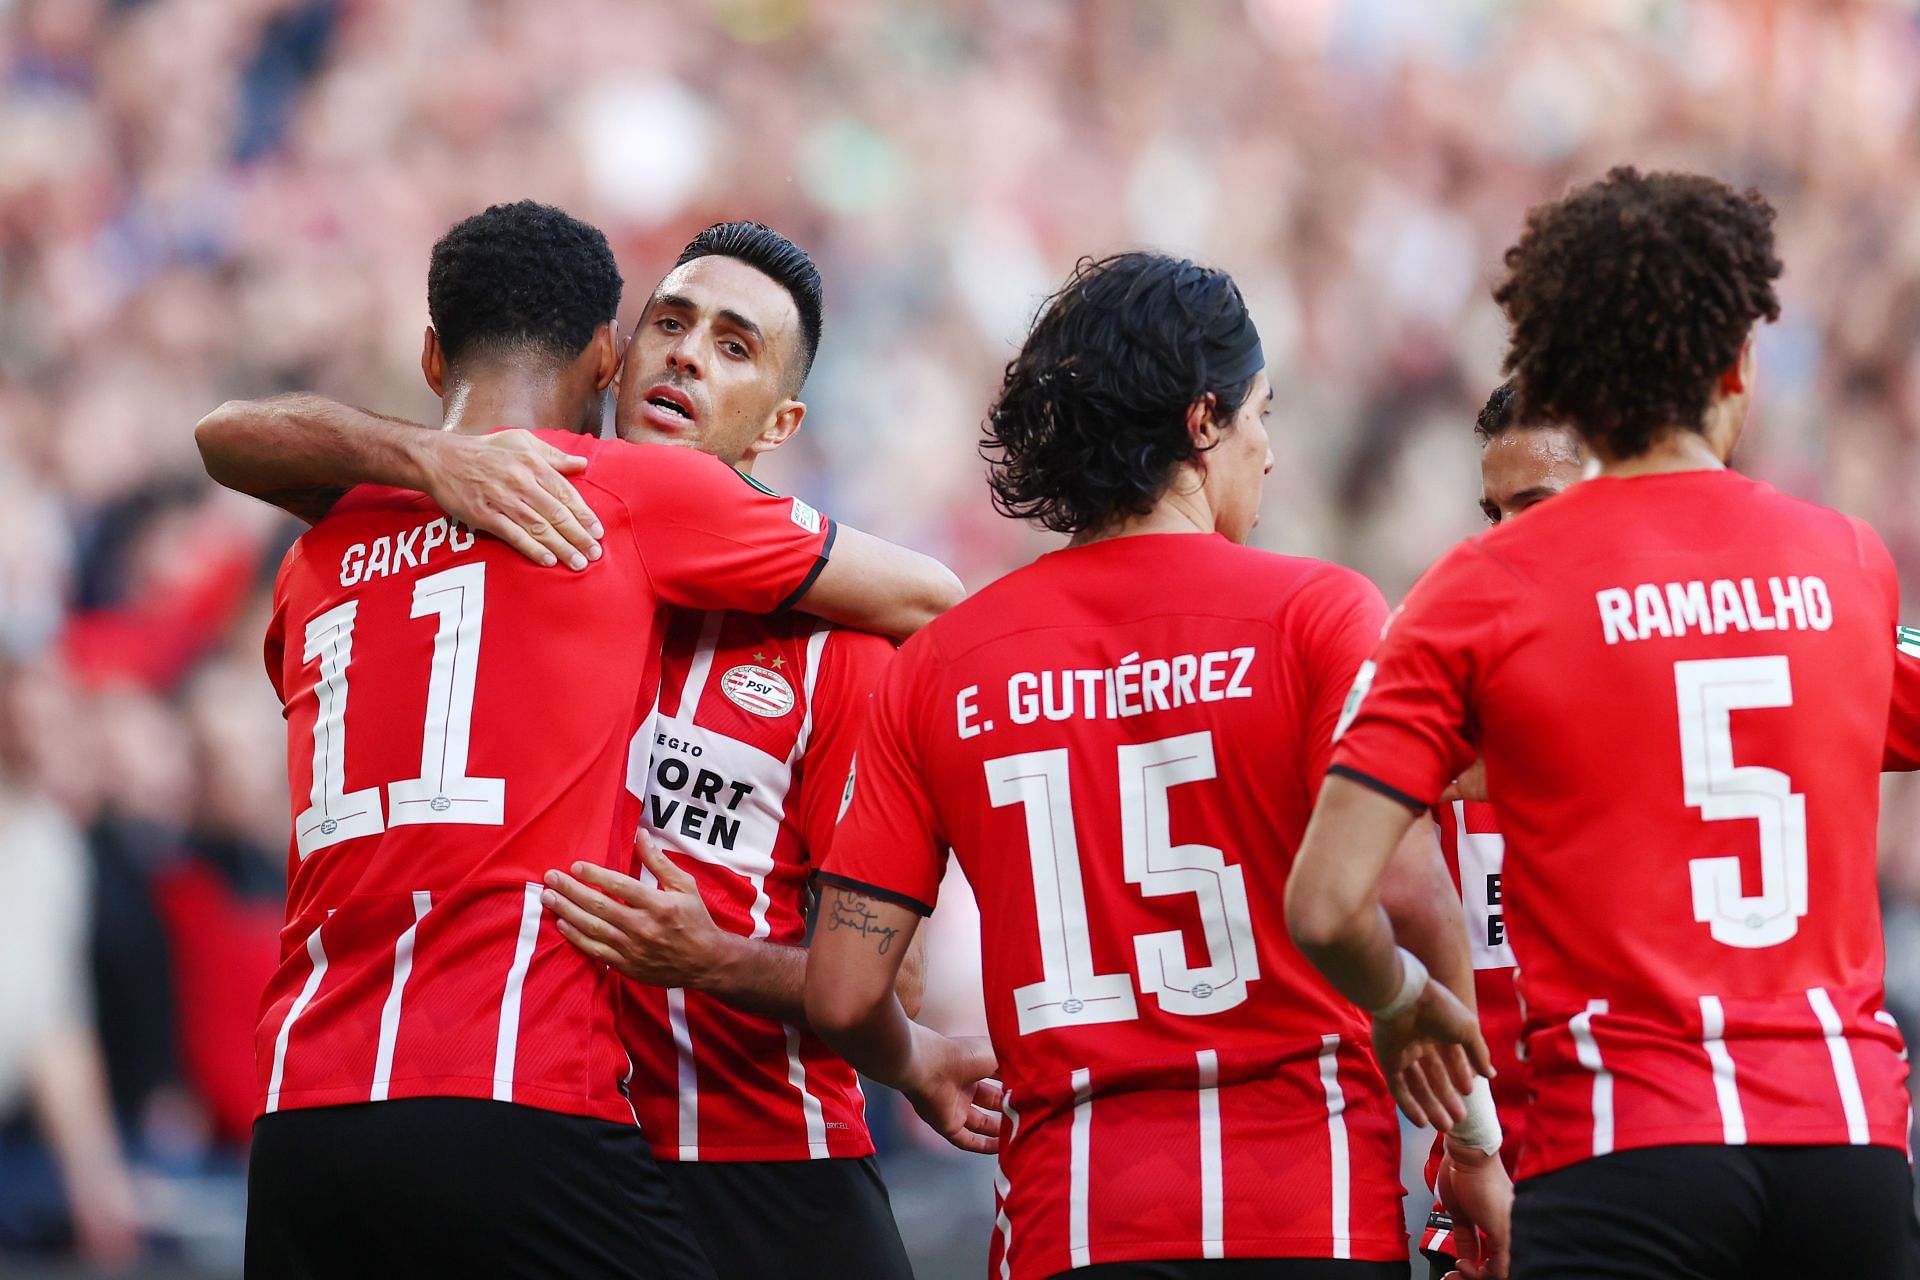 PSV Eindhoven will face Cambuur on Saturday